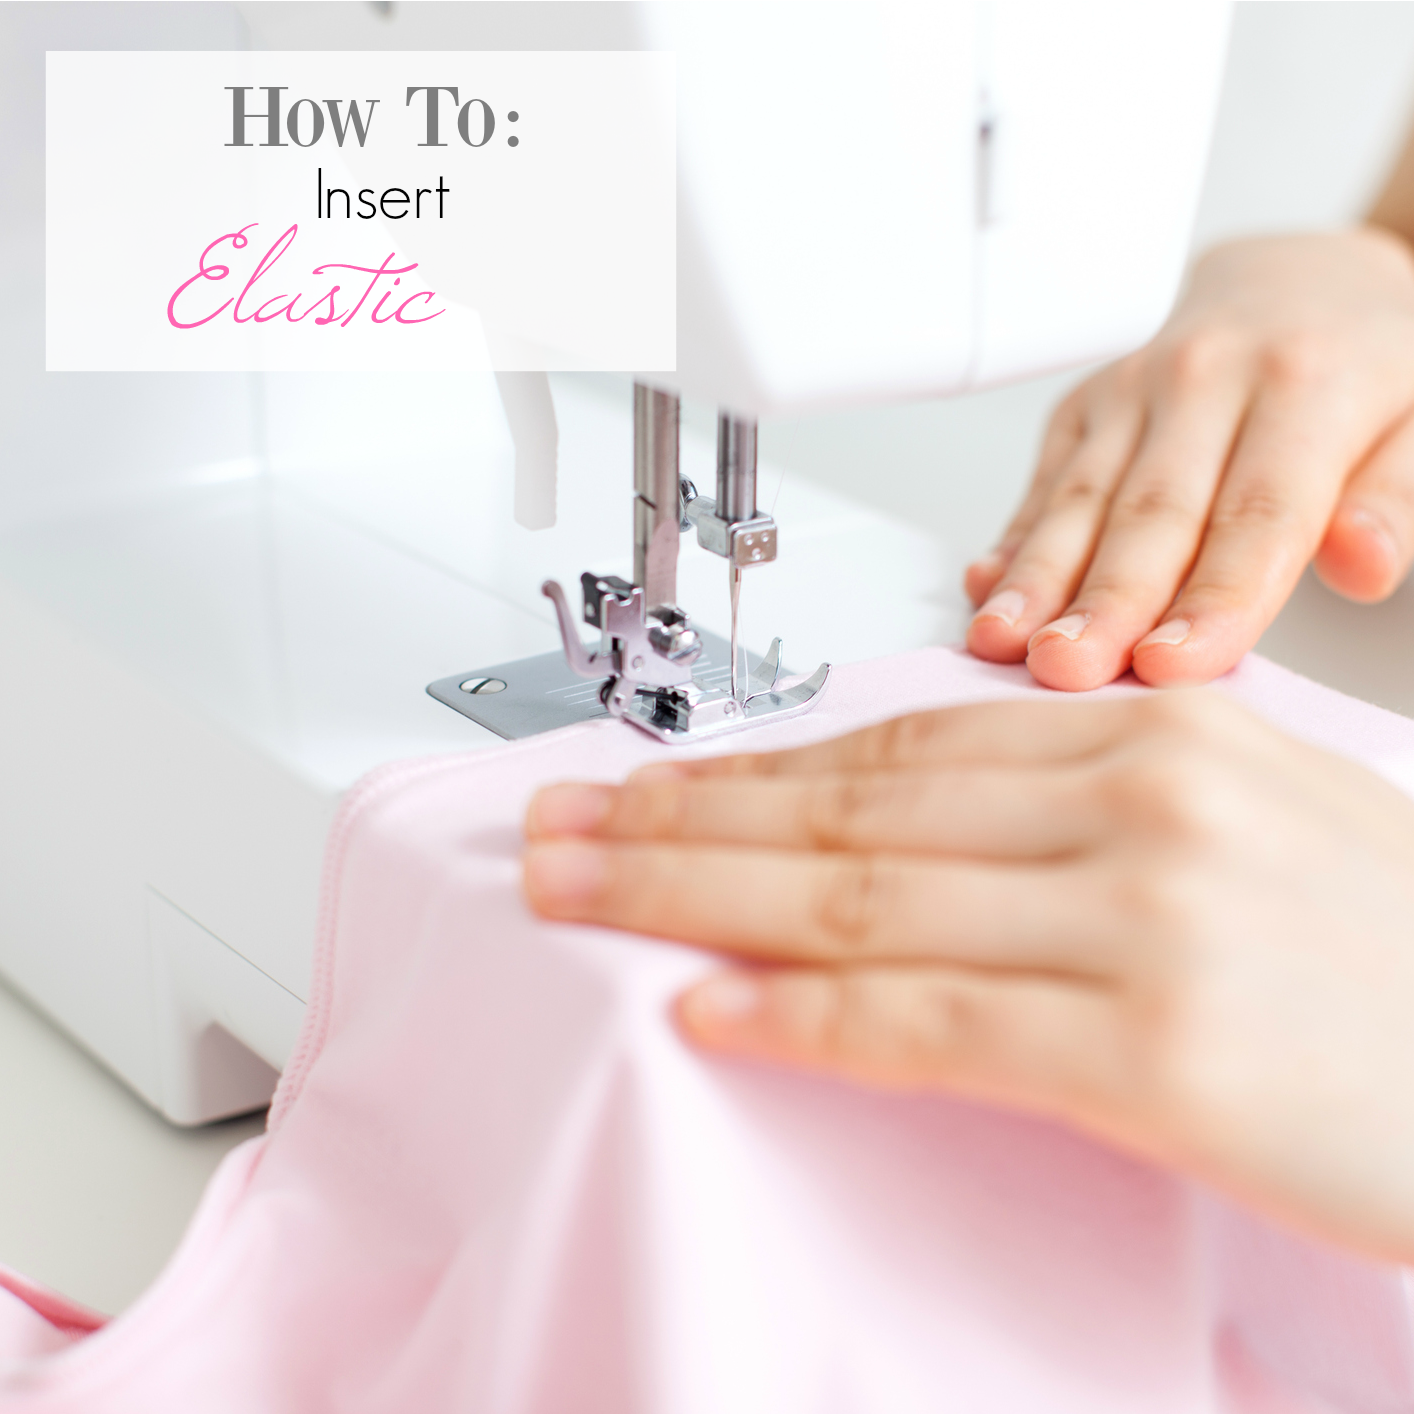 Learn to Sew Lesson #4: How to Insert Elastic